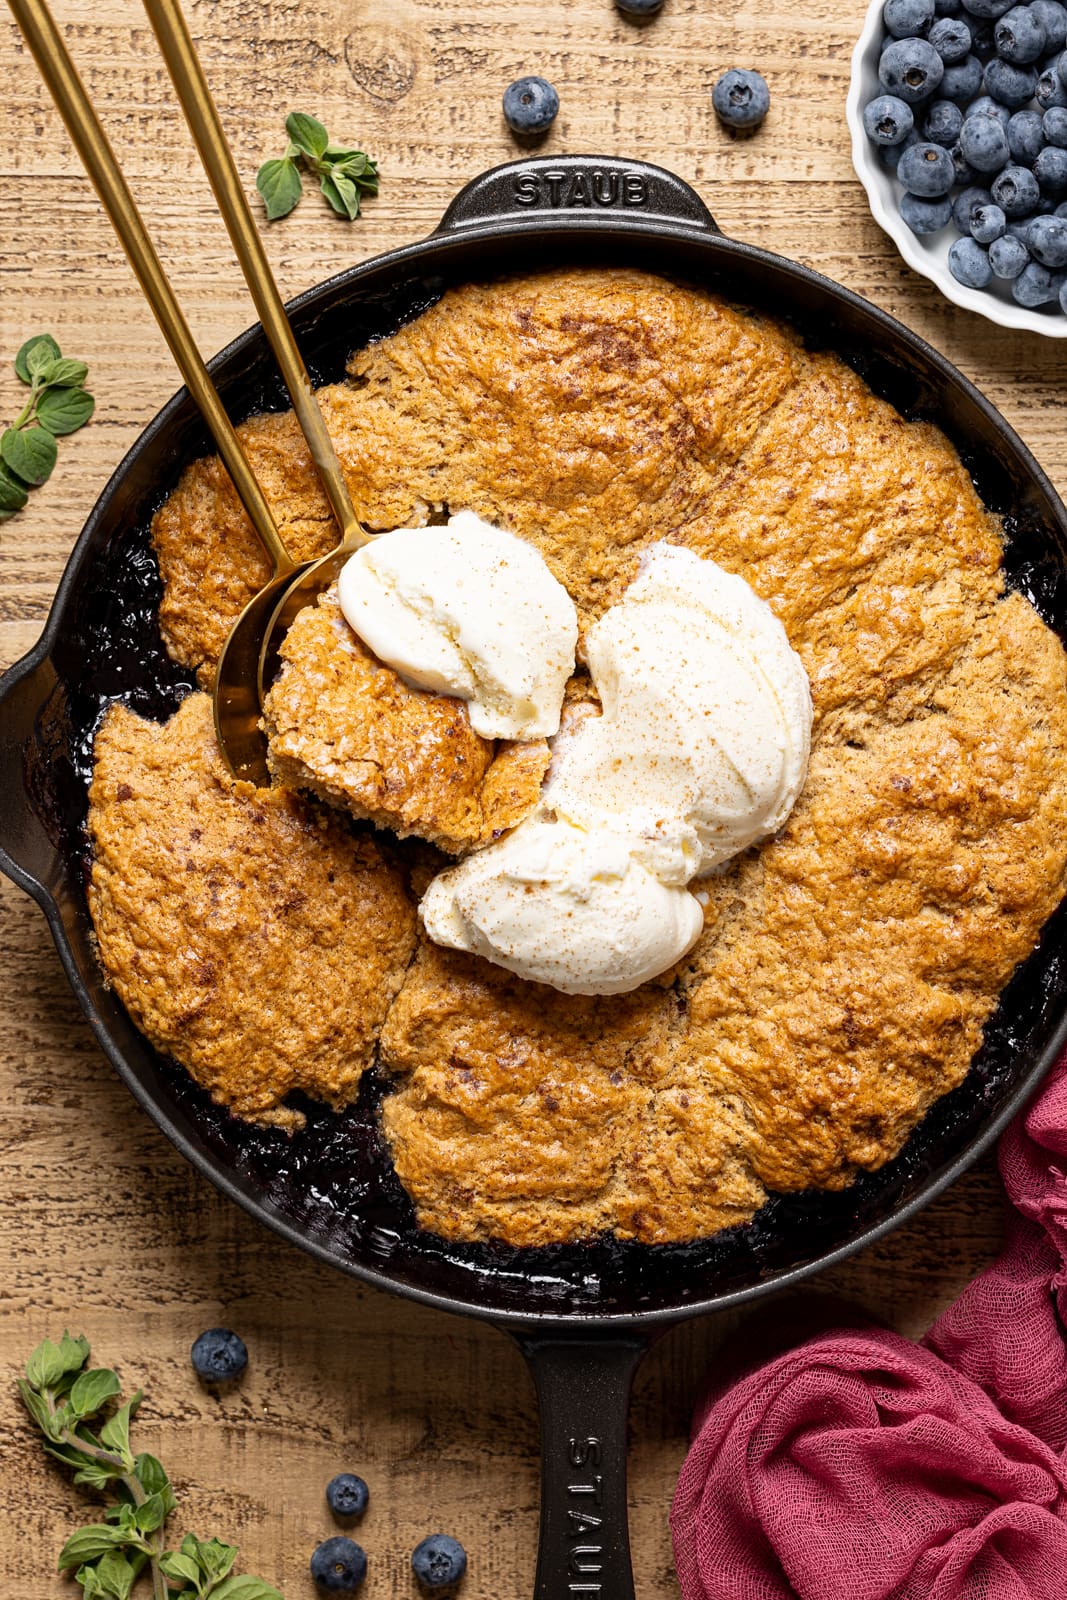 Baked cobbler in a skillet with scoops of ice cream and two spoons.